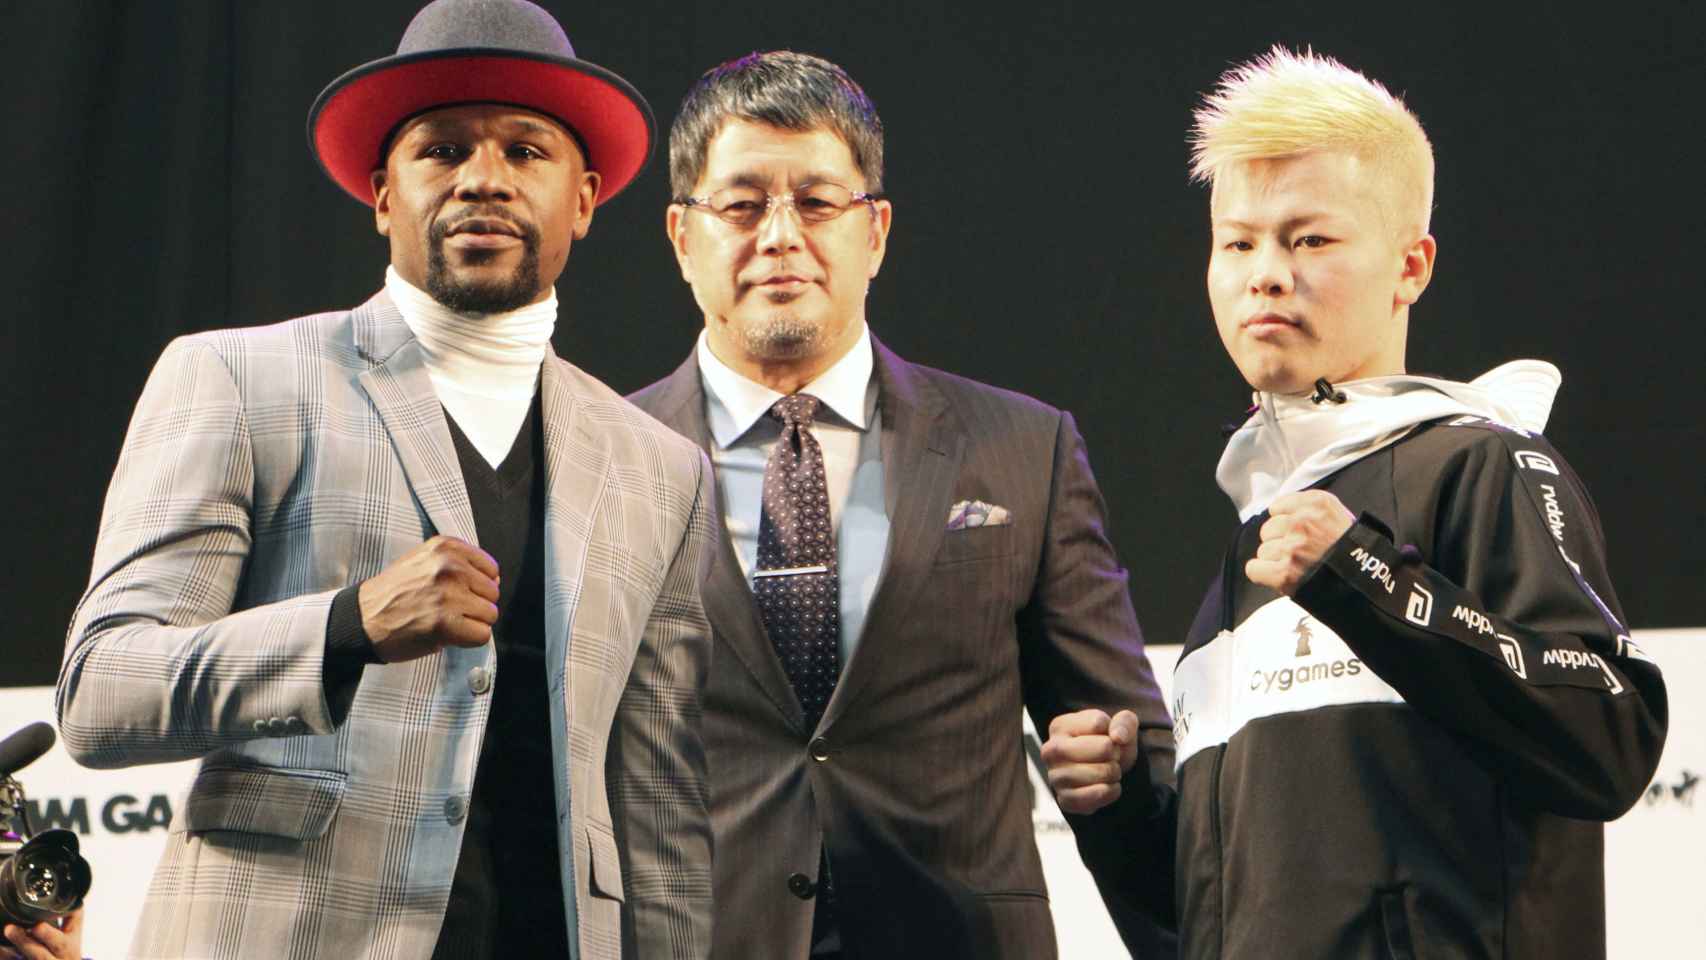 Undefeated boxer Floyd Mayweather Jr. of the U.S. poses with Japanese kickboxer Tenshin Nasukawa ahead of their RIZIN 14 exhibition bout, in Saitama